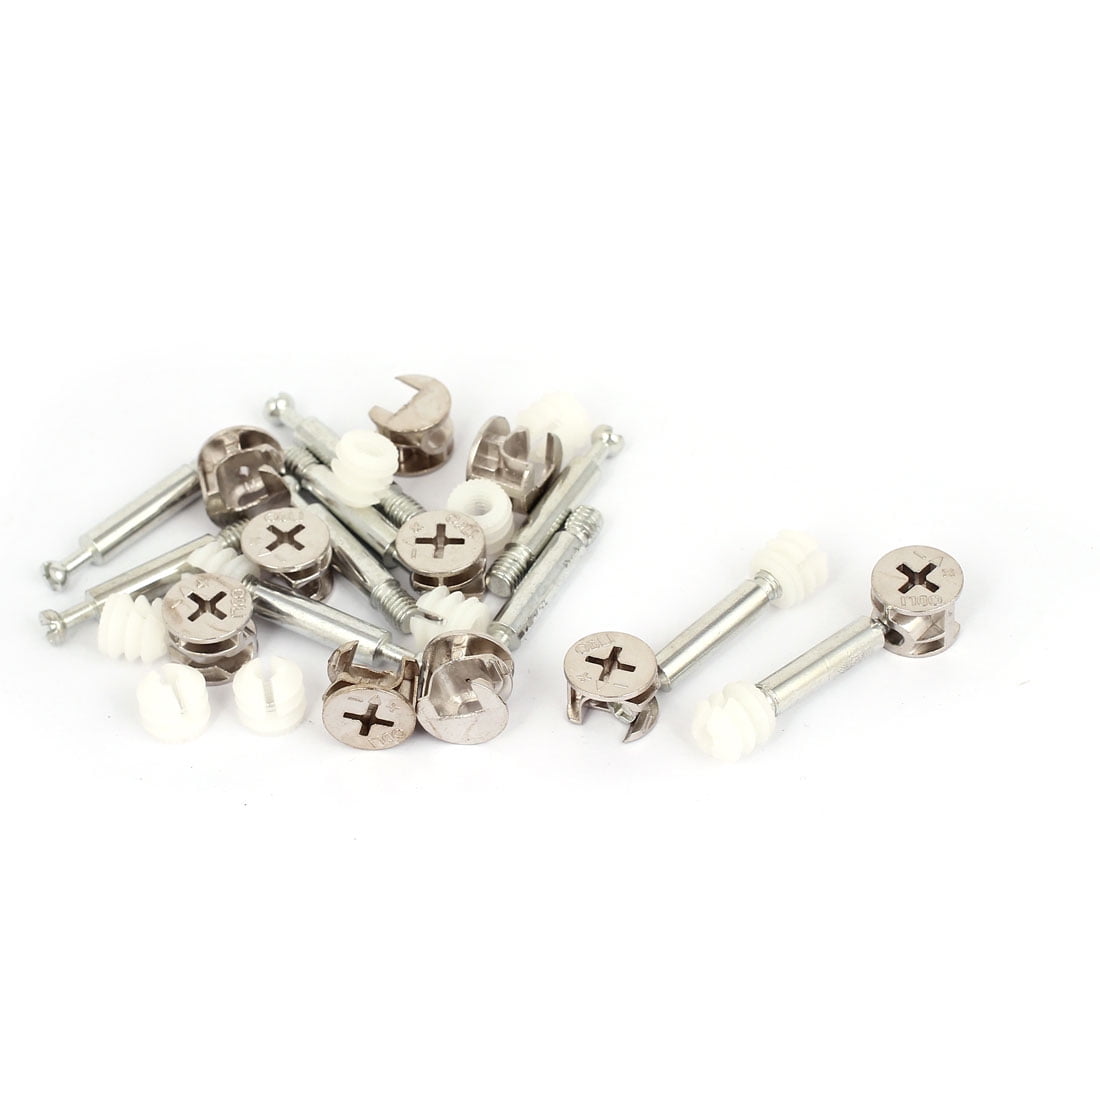 20 x Furniture Cabinet Side 15mm Dia Cam Fittings Dowel and Inserted Nut Plastic 